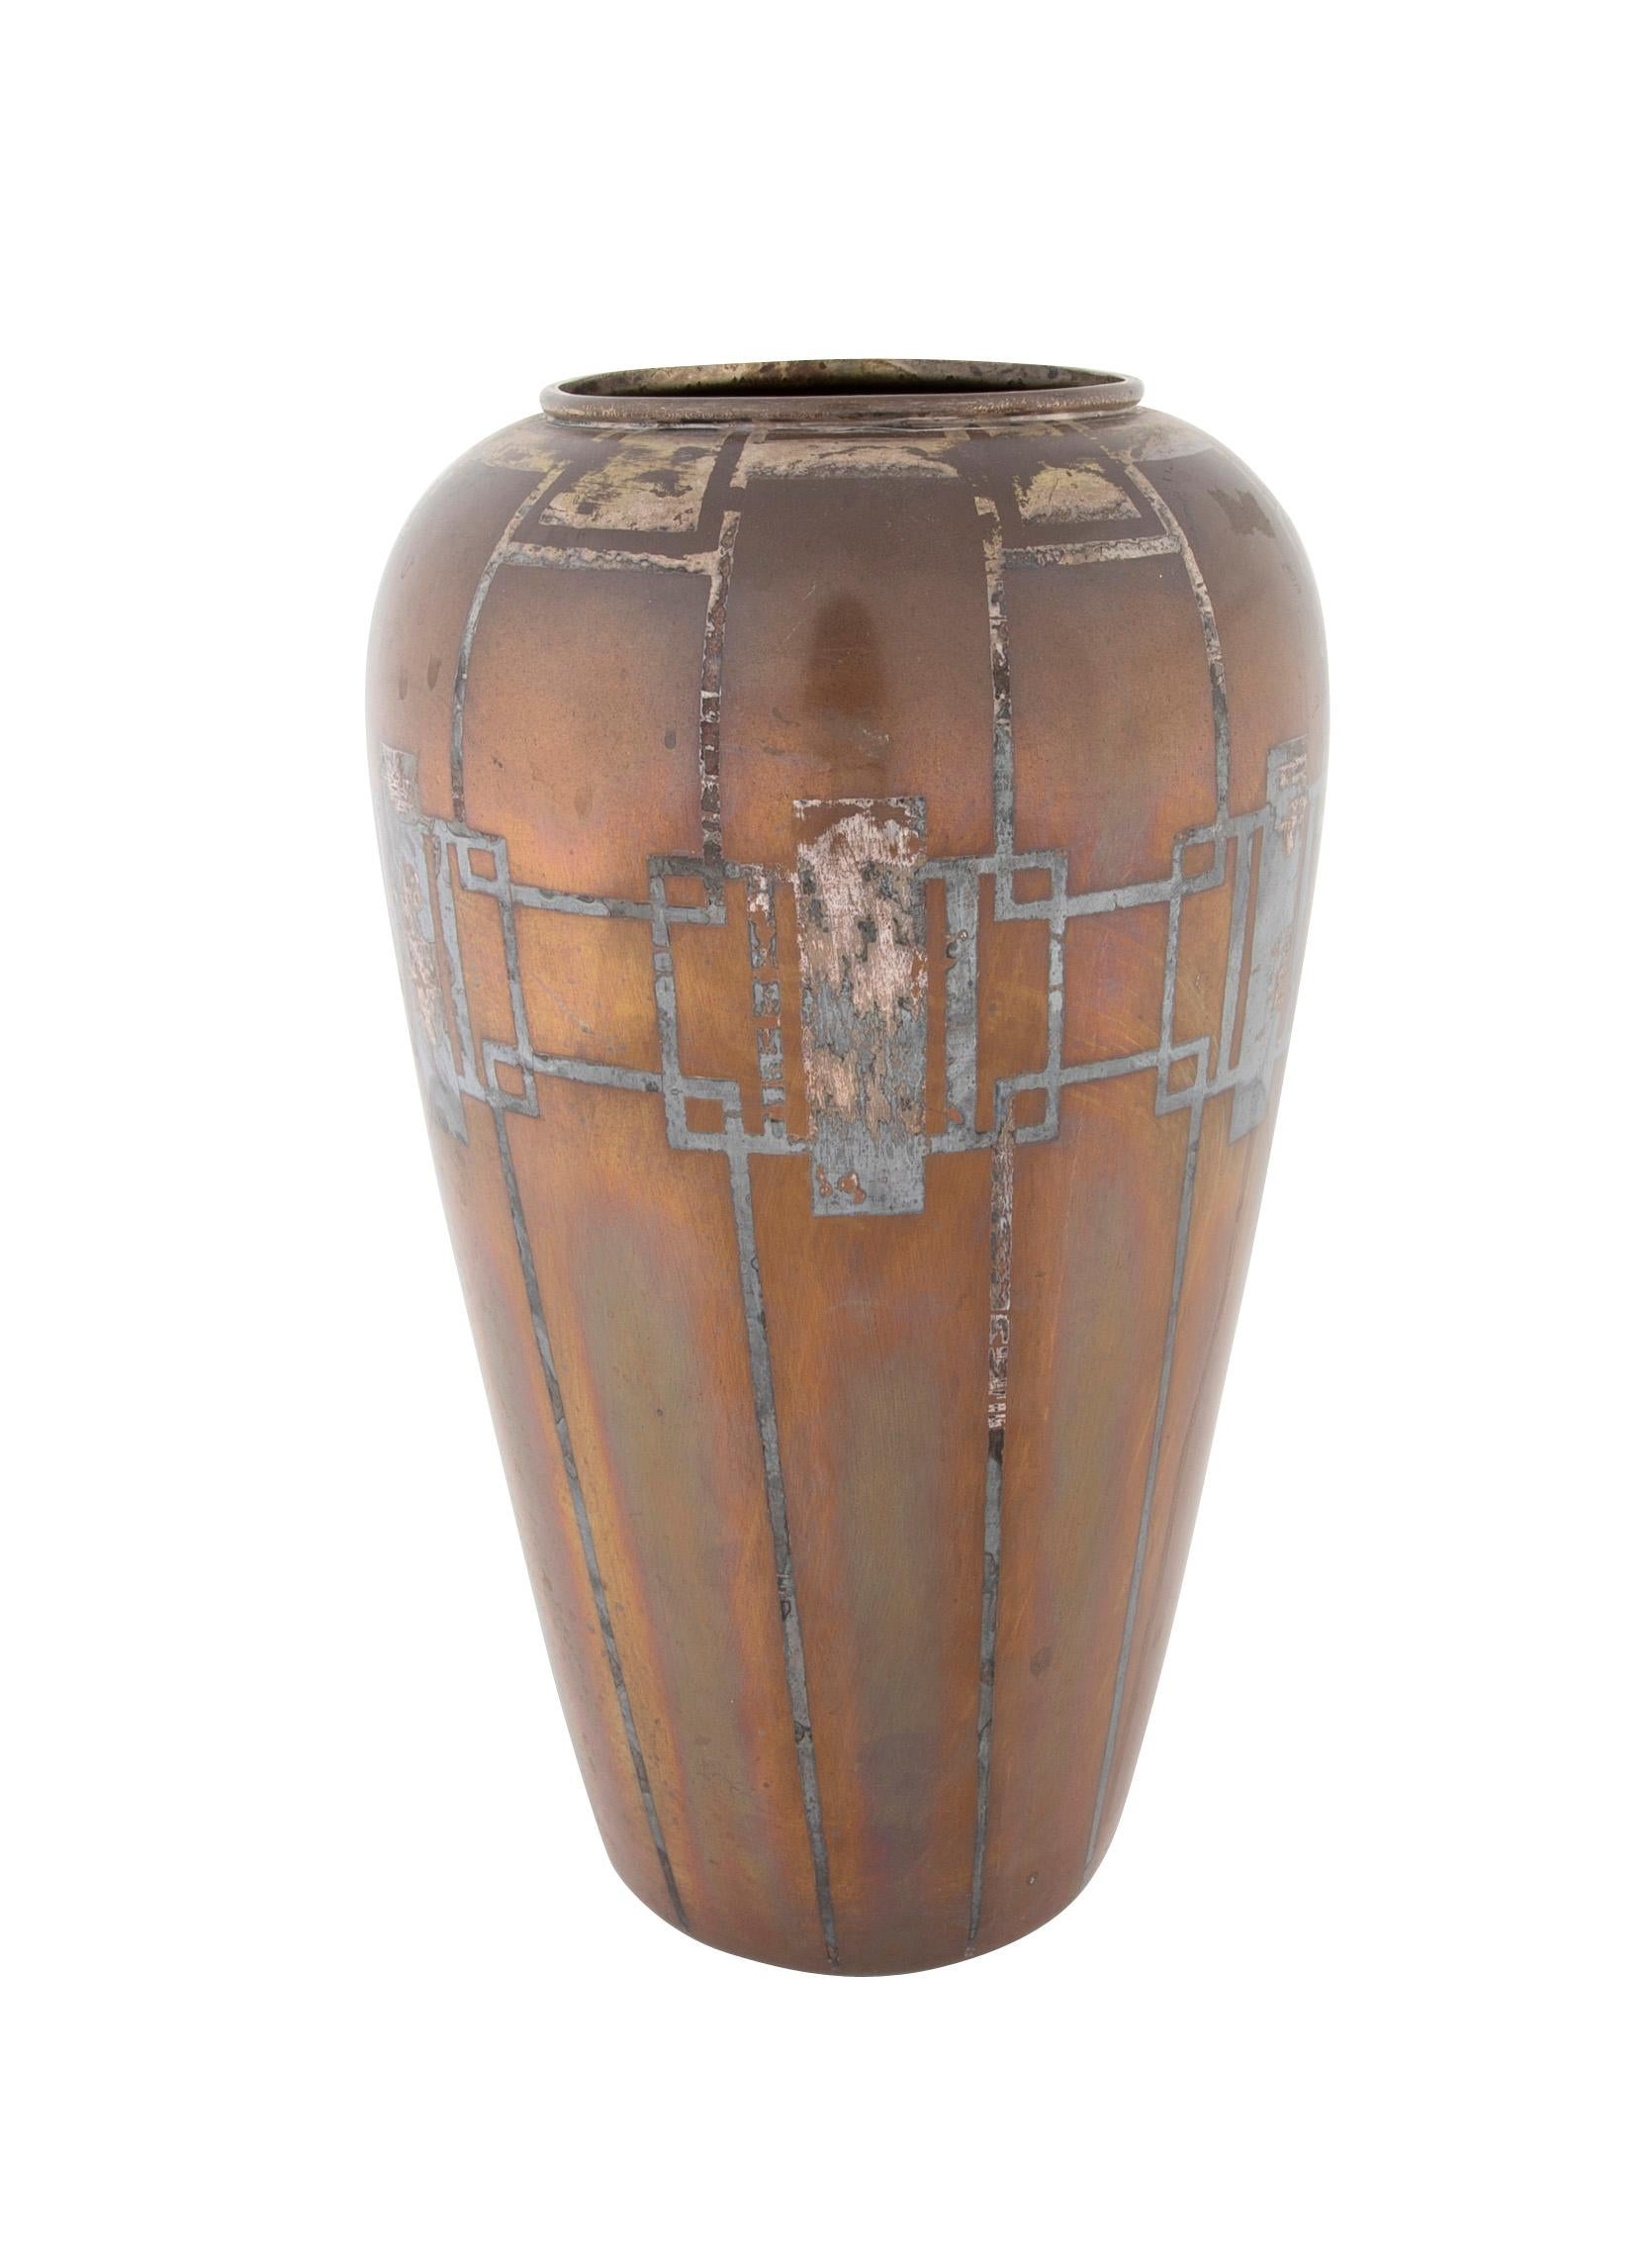 A Group of Three Dinanderie Copper Vases by Christofle and Luc Lanel For Sale 2